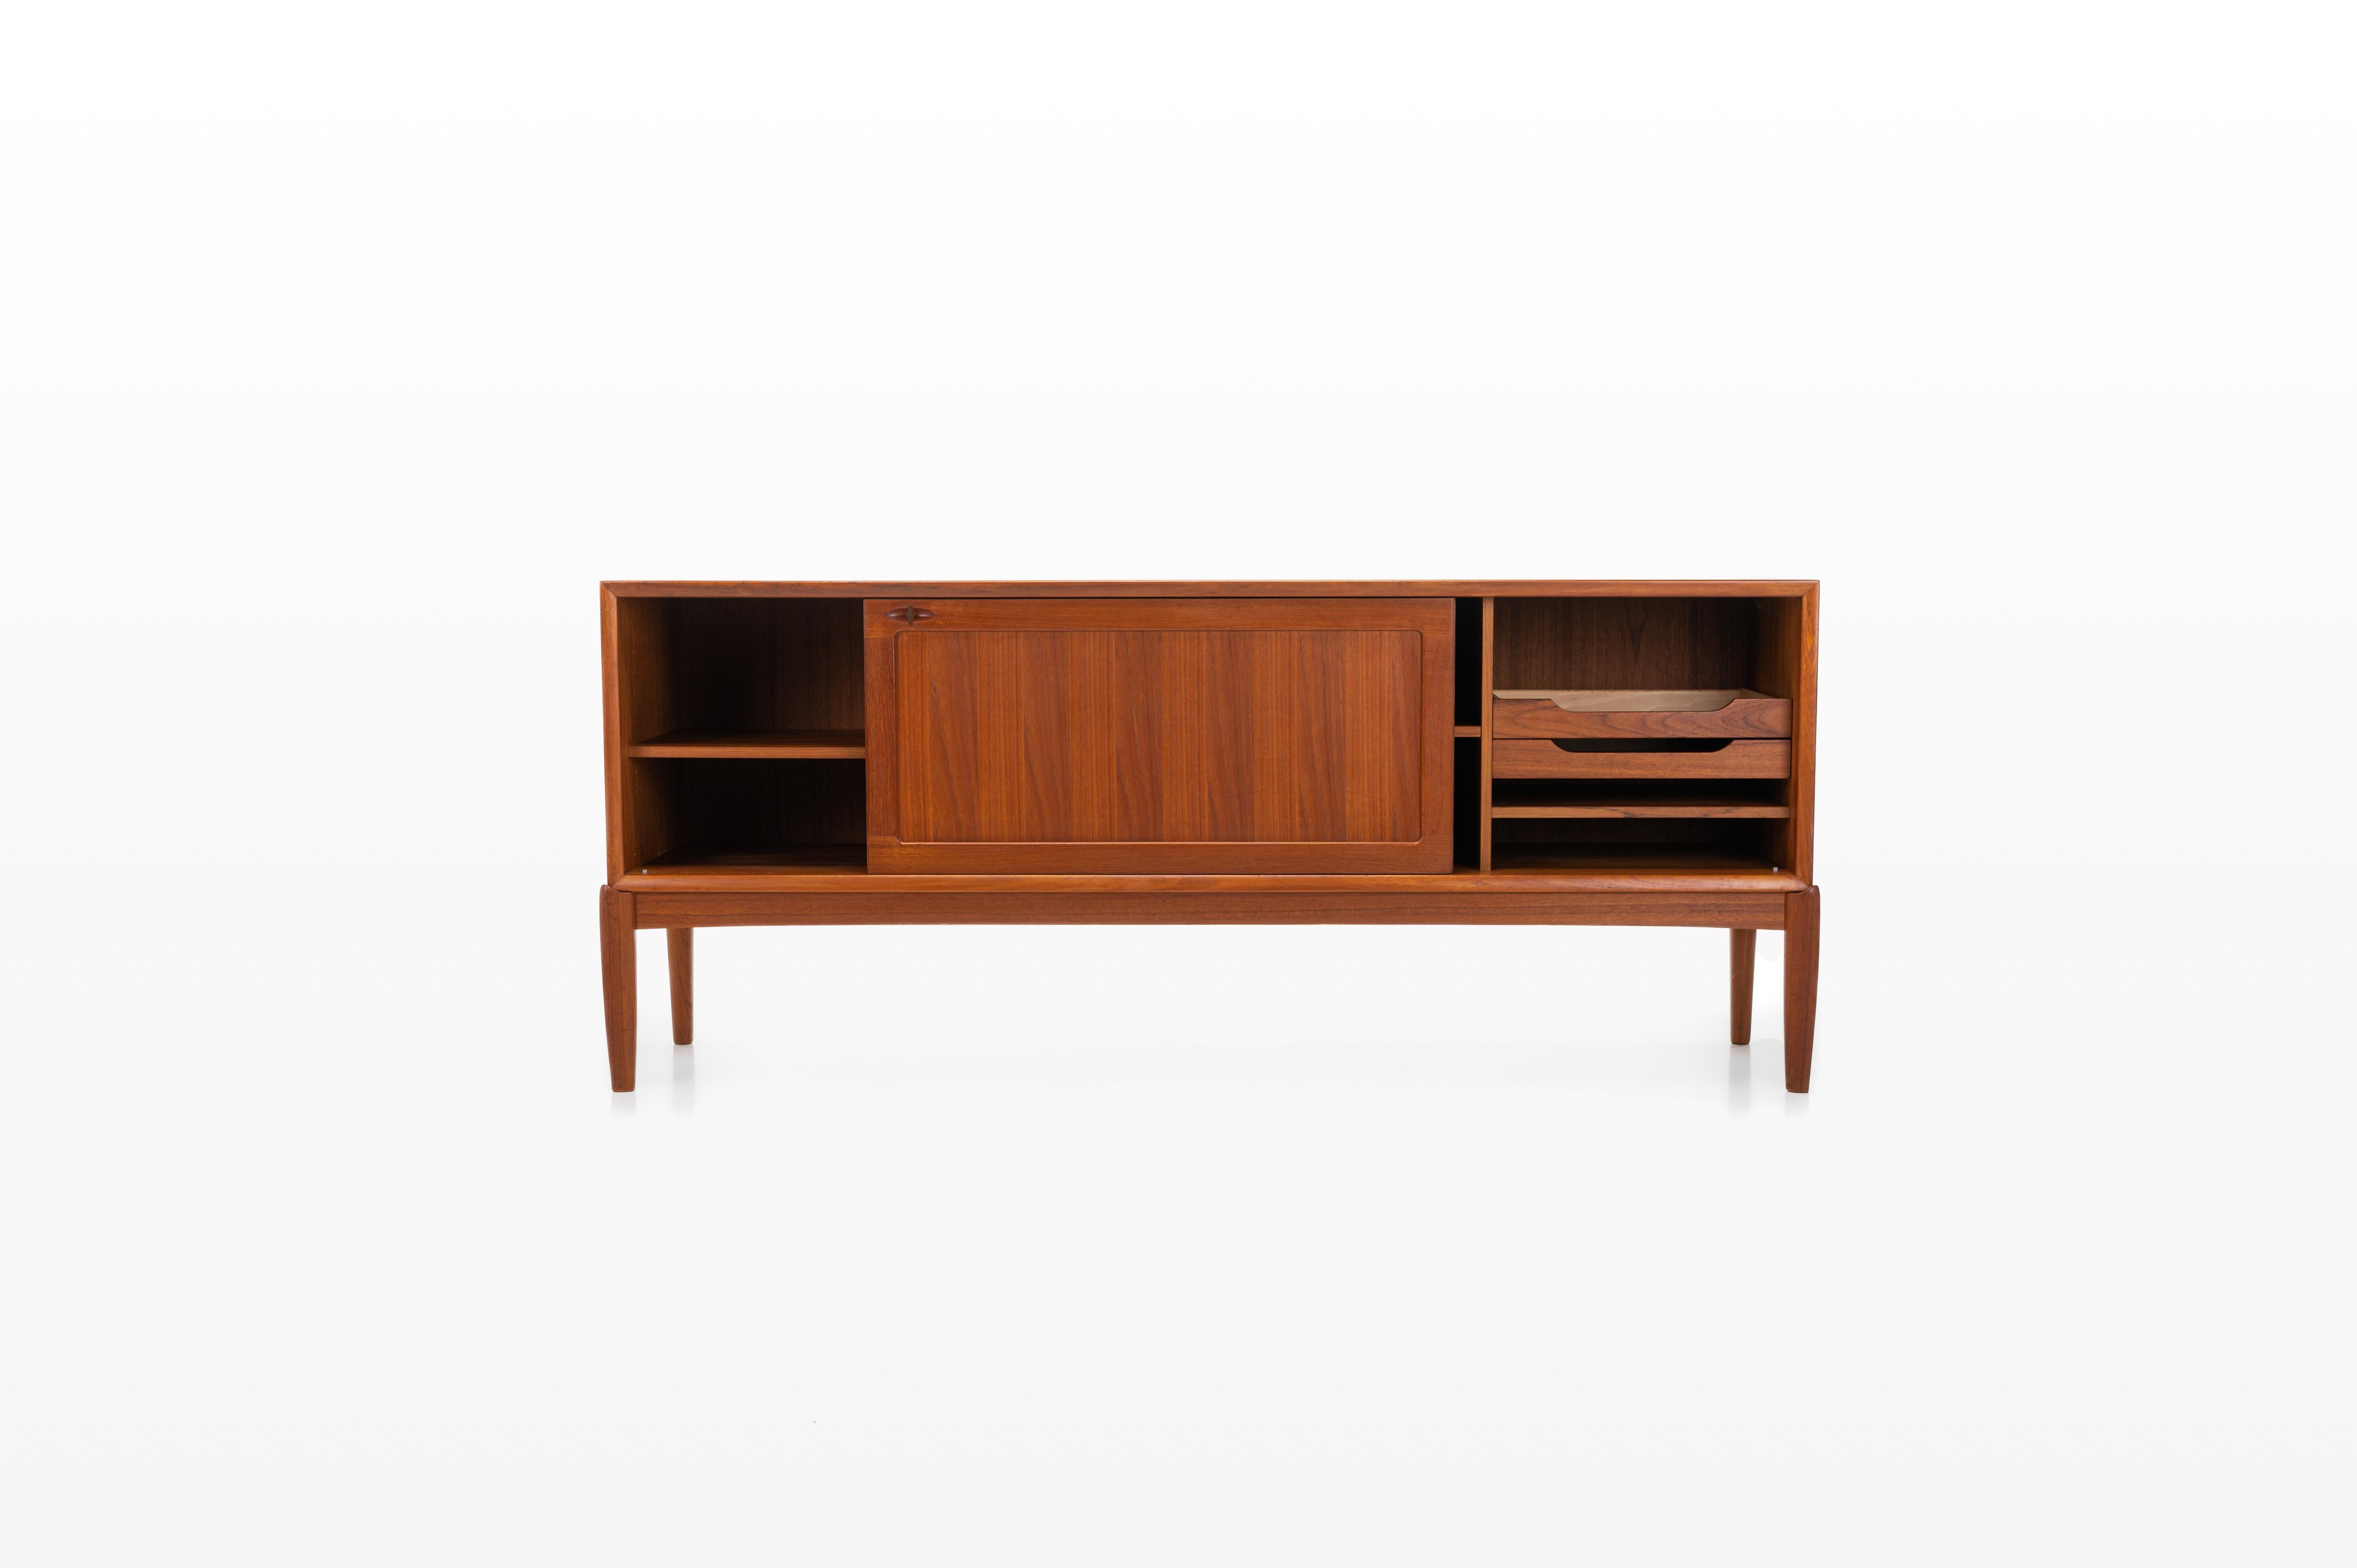 Danish sideboard designed by H.W. Klein for Bramin 1950s. This teak sideboard has 2 inner drawers, a lot of storage space and 2 sliding doors.